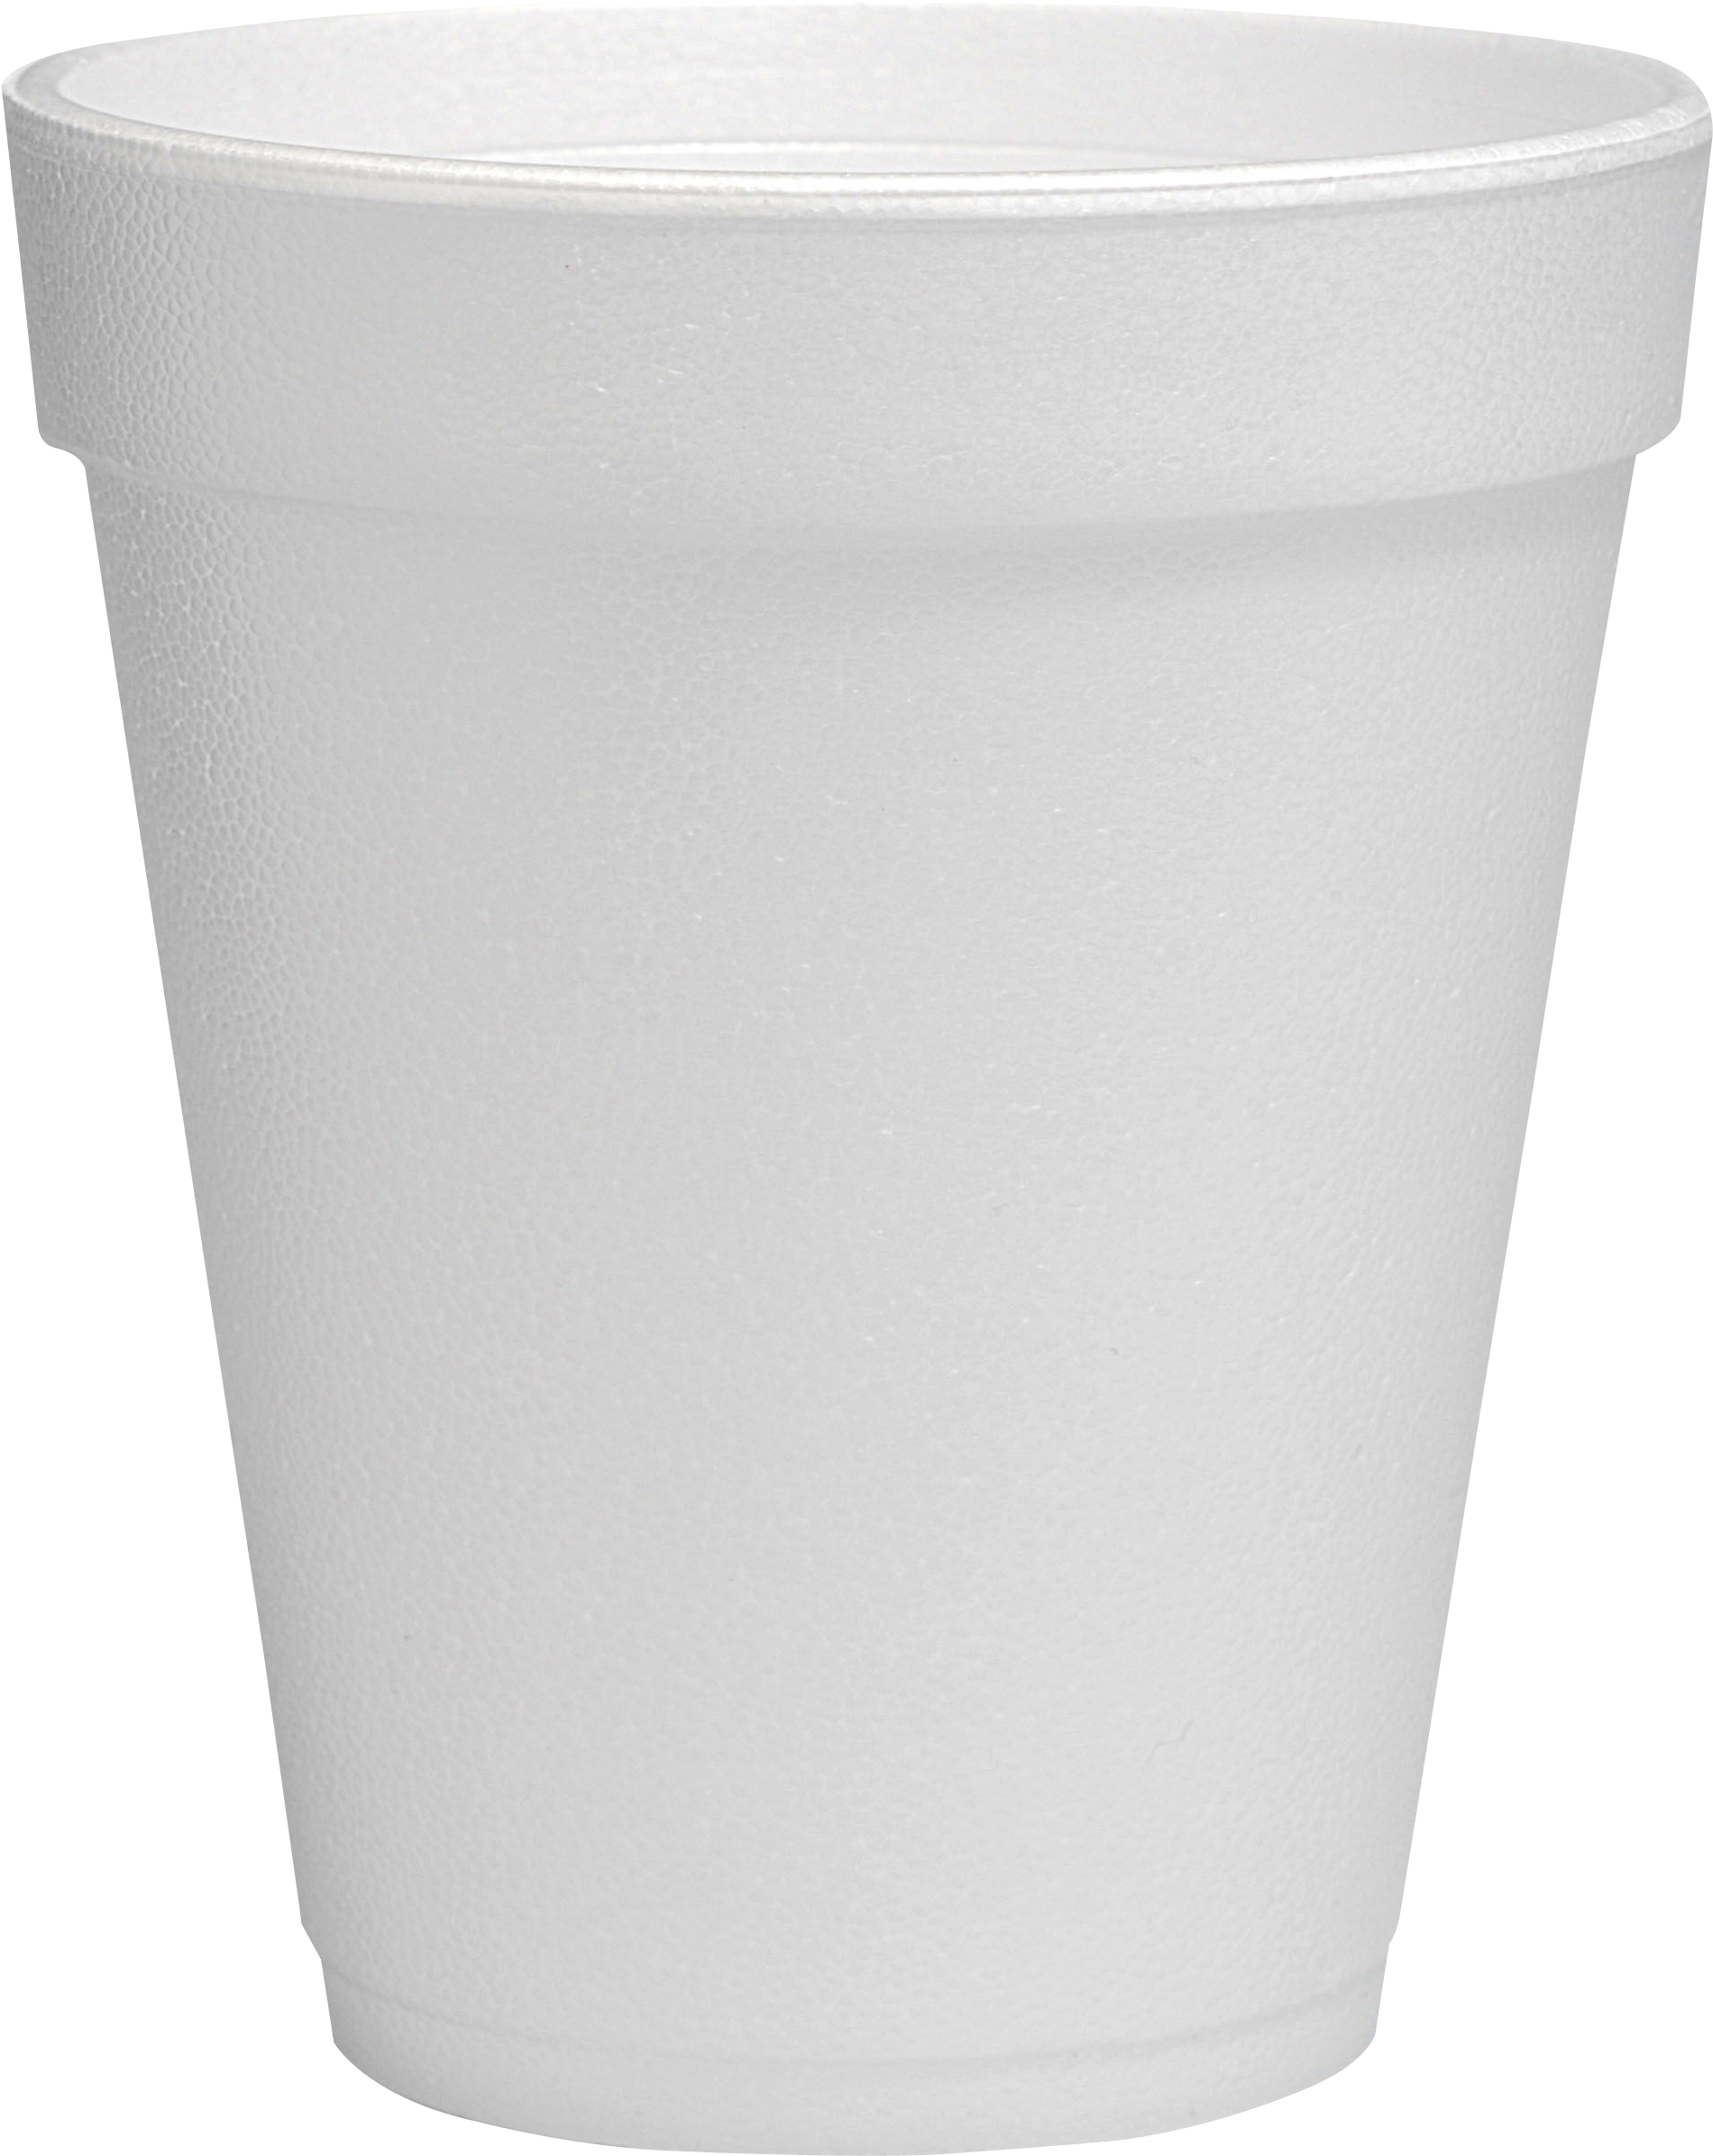 2104 X 2539 Plastic Cup Png